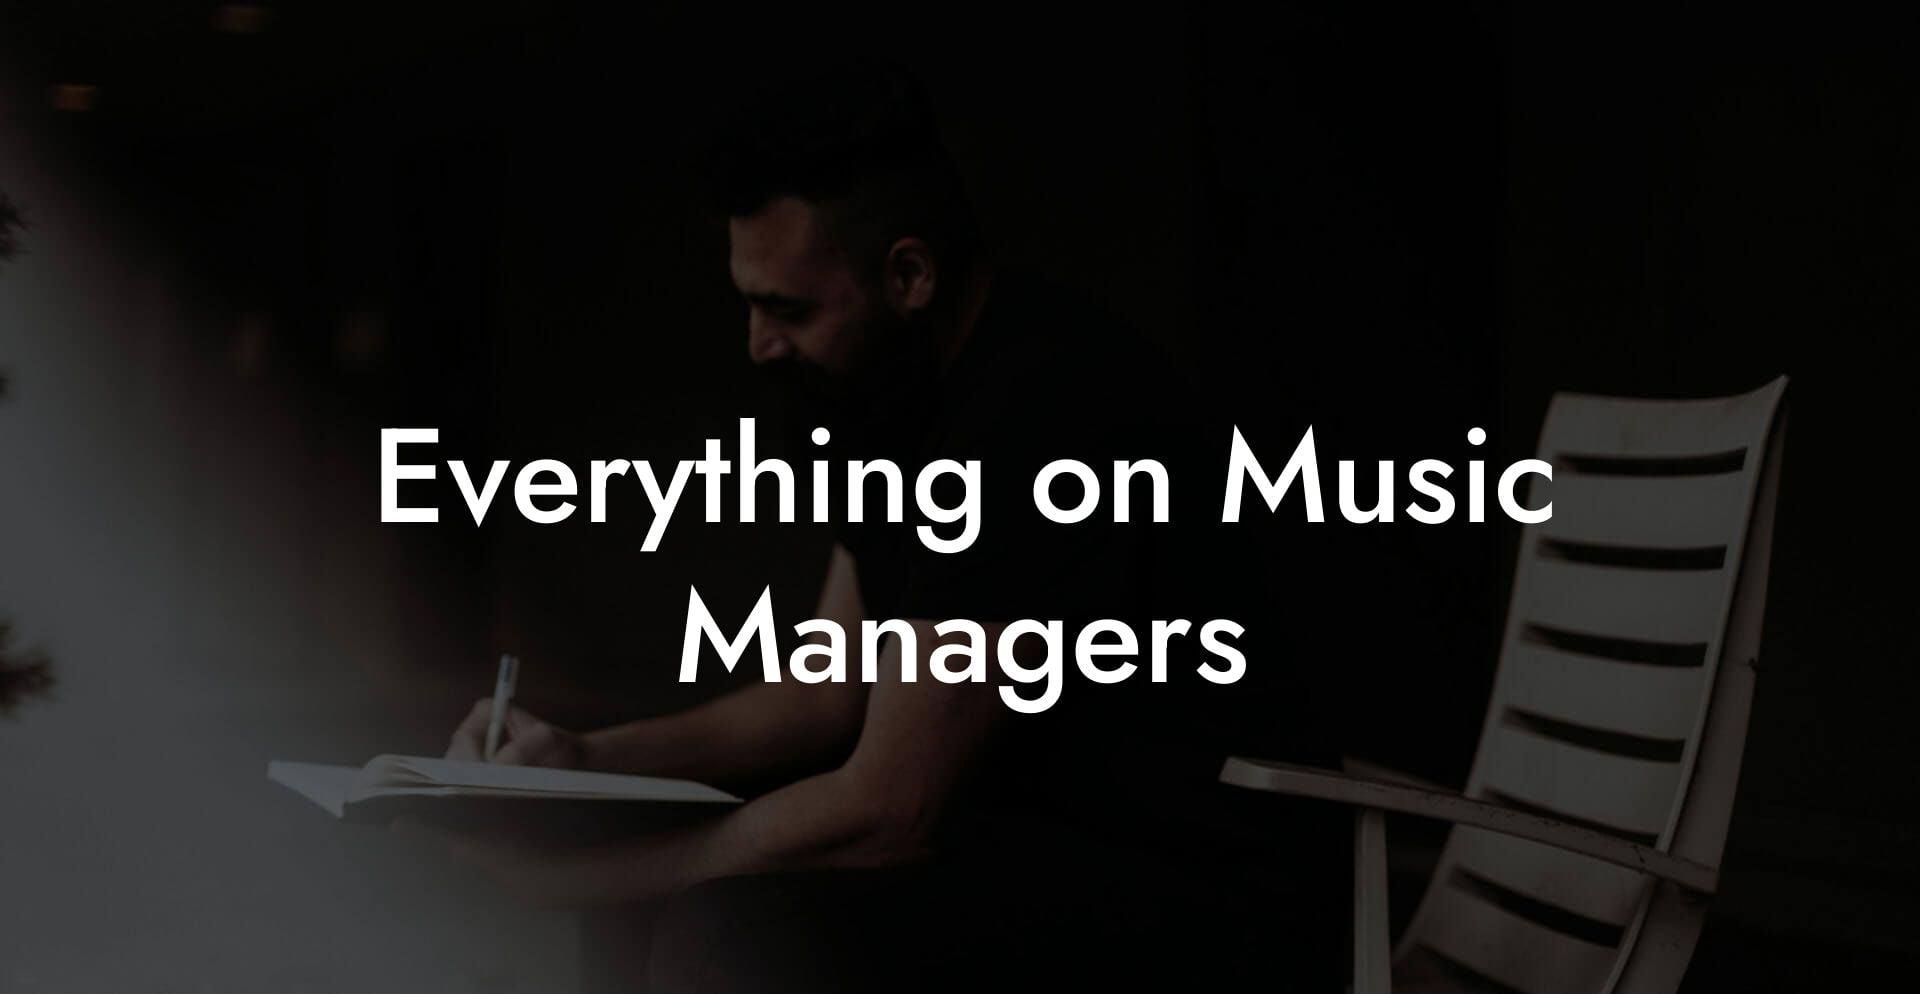 Everything on Music Managers